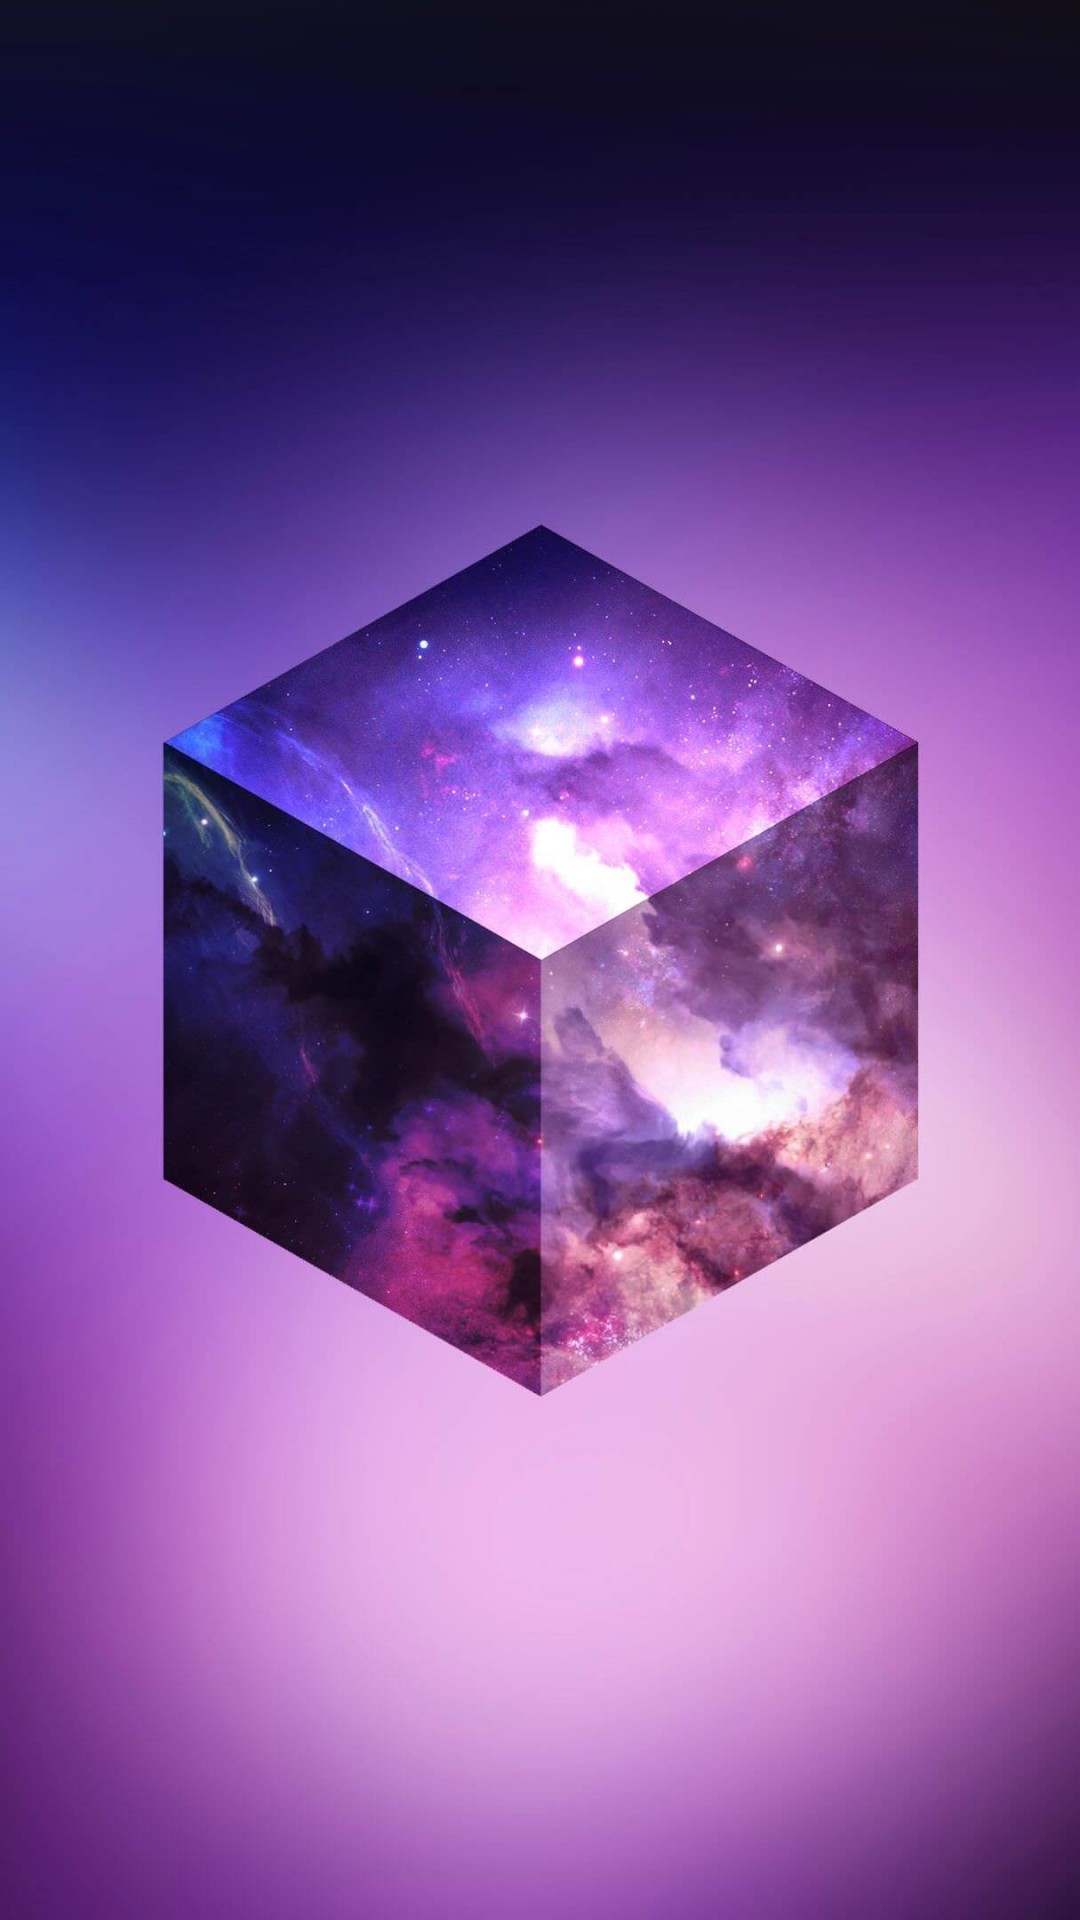 Cosmic Cube Wallpaper for SAMSUNG Galaxy S4